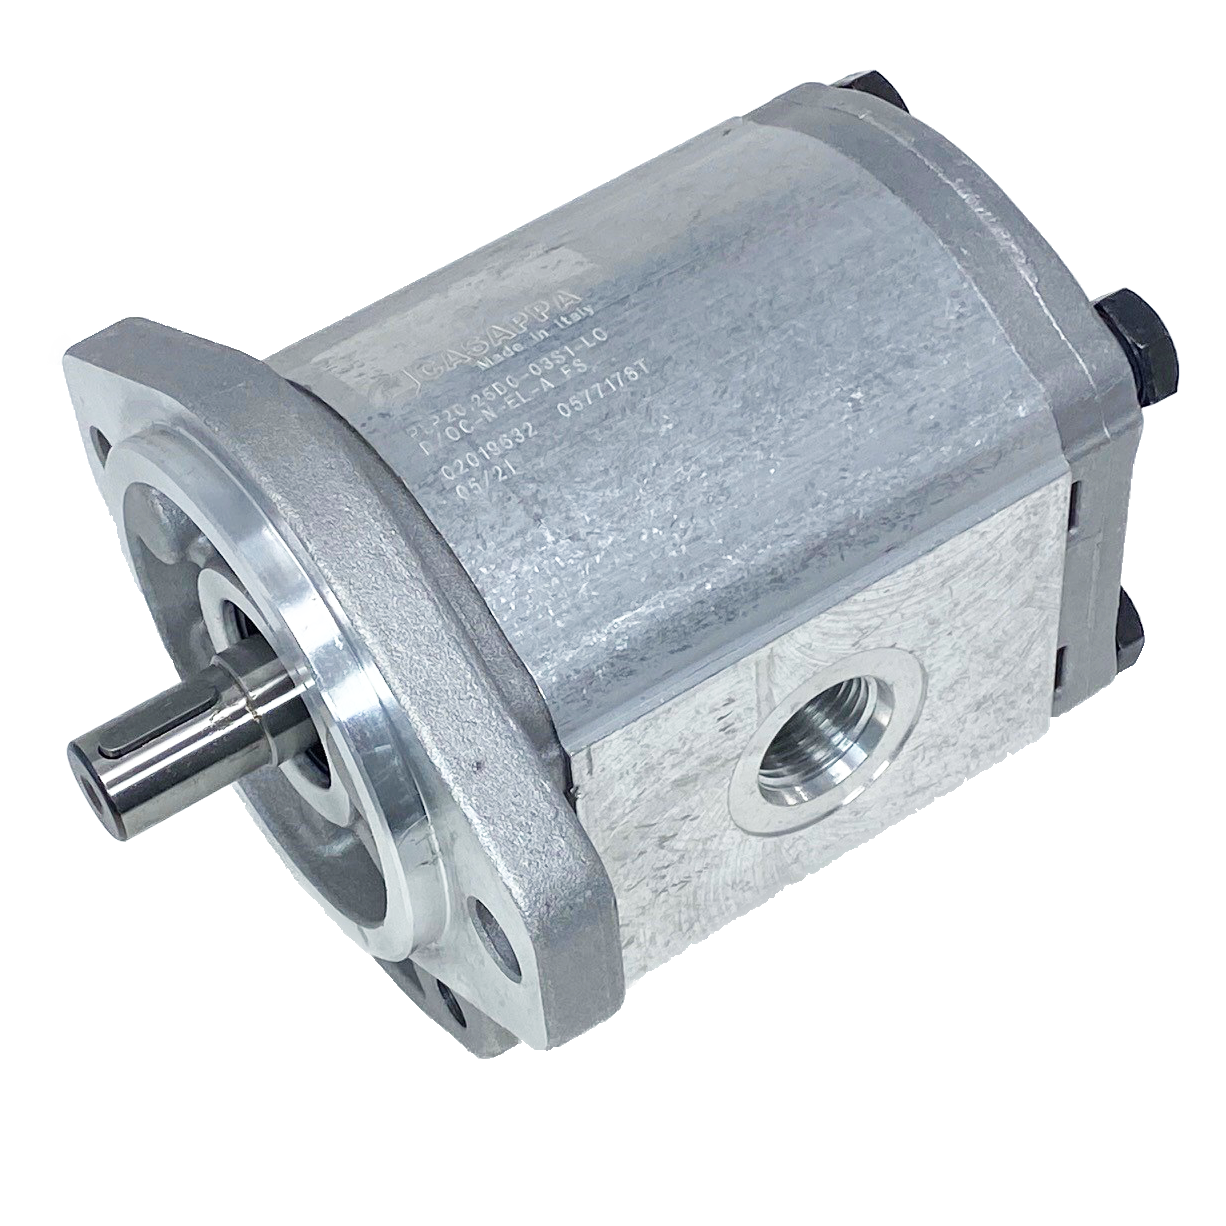 PHP20.31,5S0-31S9-LOG/OC-N-EL : Casappa Polaris Gear Pump, 33.03cc, 2900psi Rated, 2500RPM, CCW, 5/8" Bore x 5/32" Key Shaft, SAE A 2-Bolt Flange, 1.25" #20 SAE Inlet, 0.625 (5/8") #10 SAE Outlet, Cast Iron Body, Aluminum Flange